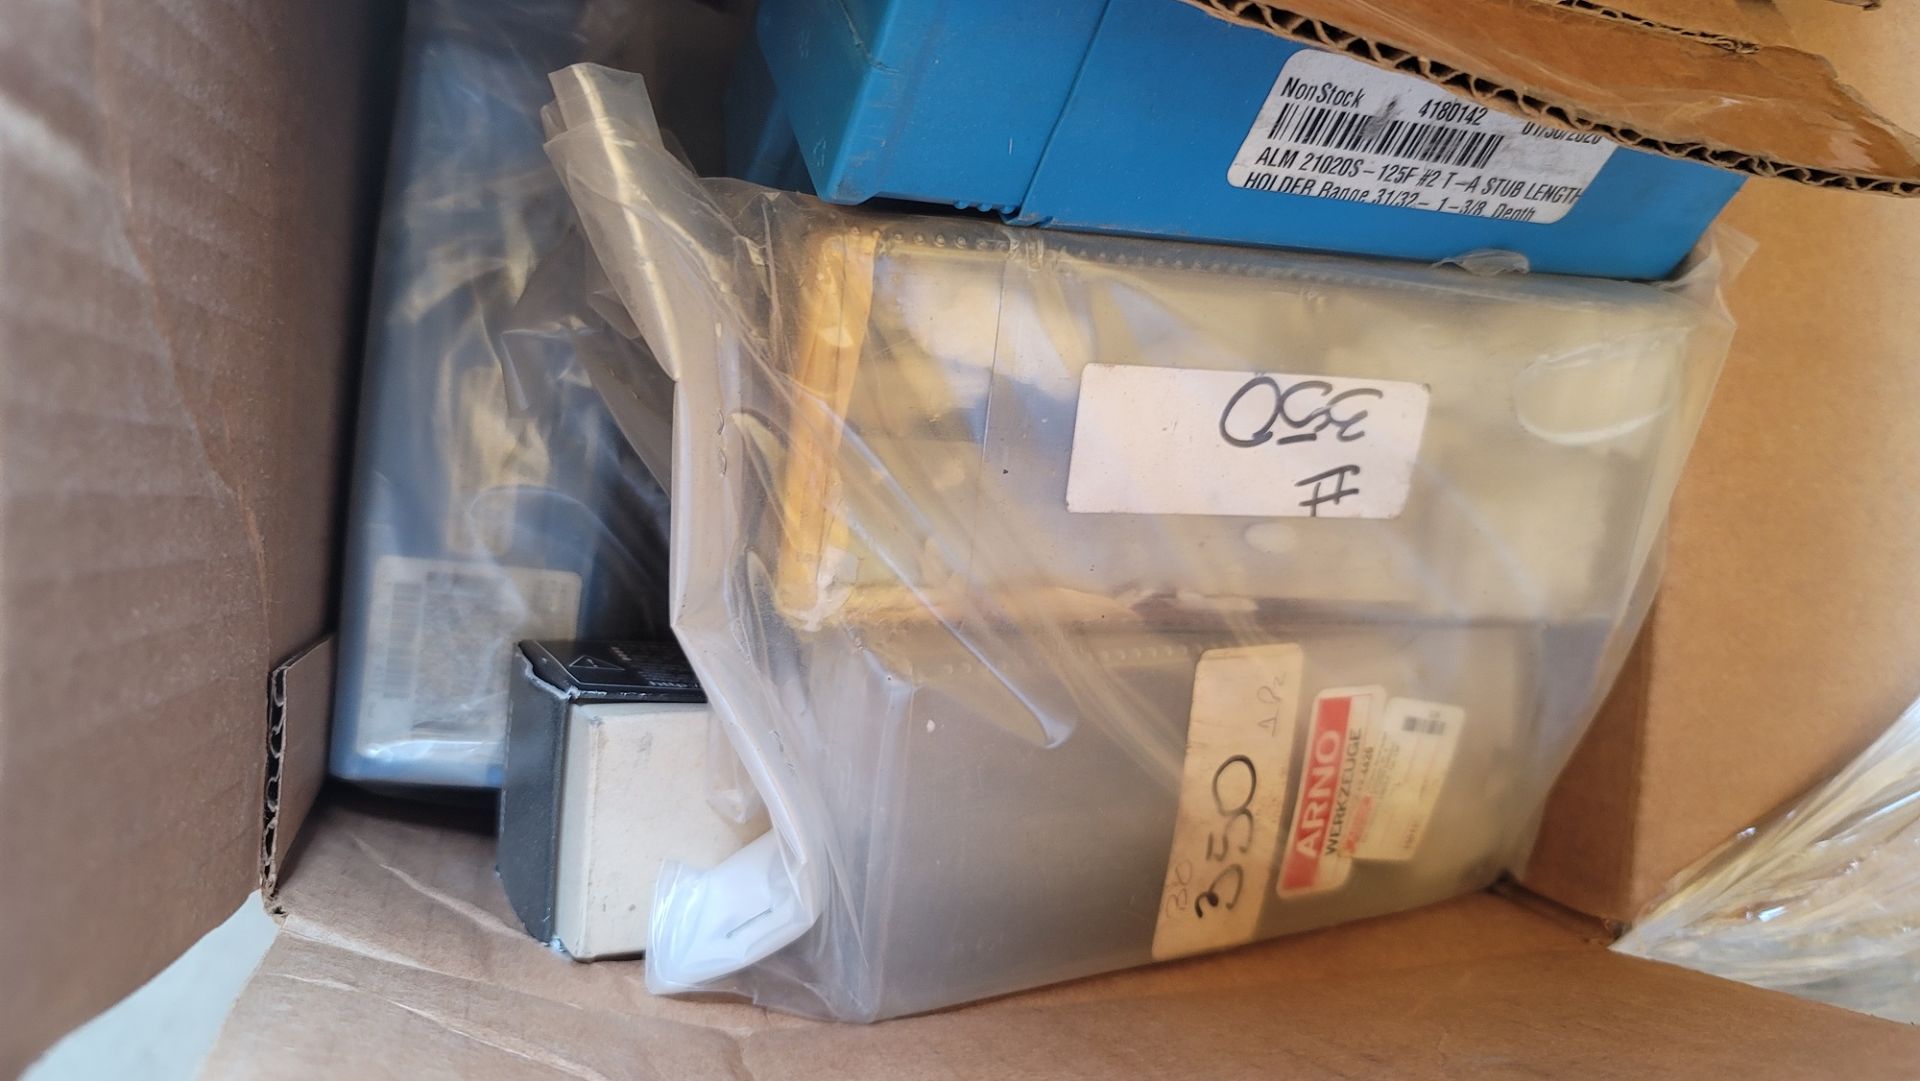 LOT - PALLET OF END MILLS, INSERTS, DRILLS, INSERT TOOL HOLDERS, CARBIDE TOOLS, ETC. - Image 6 of 6